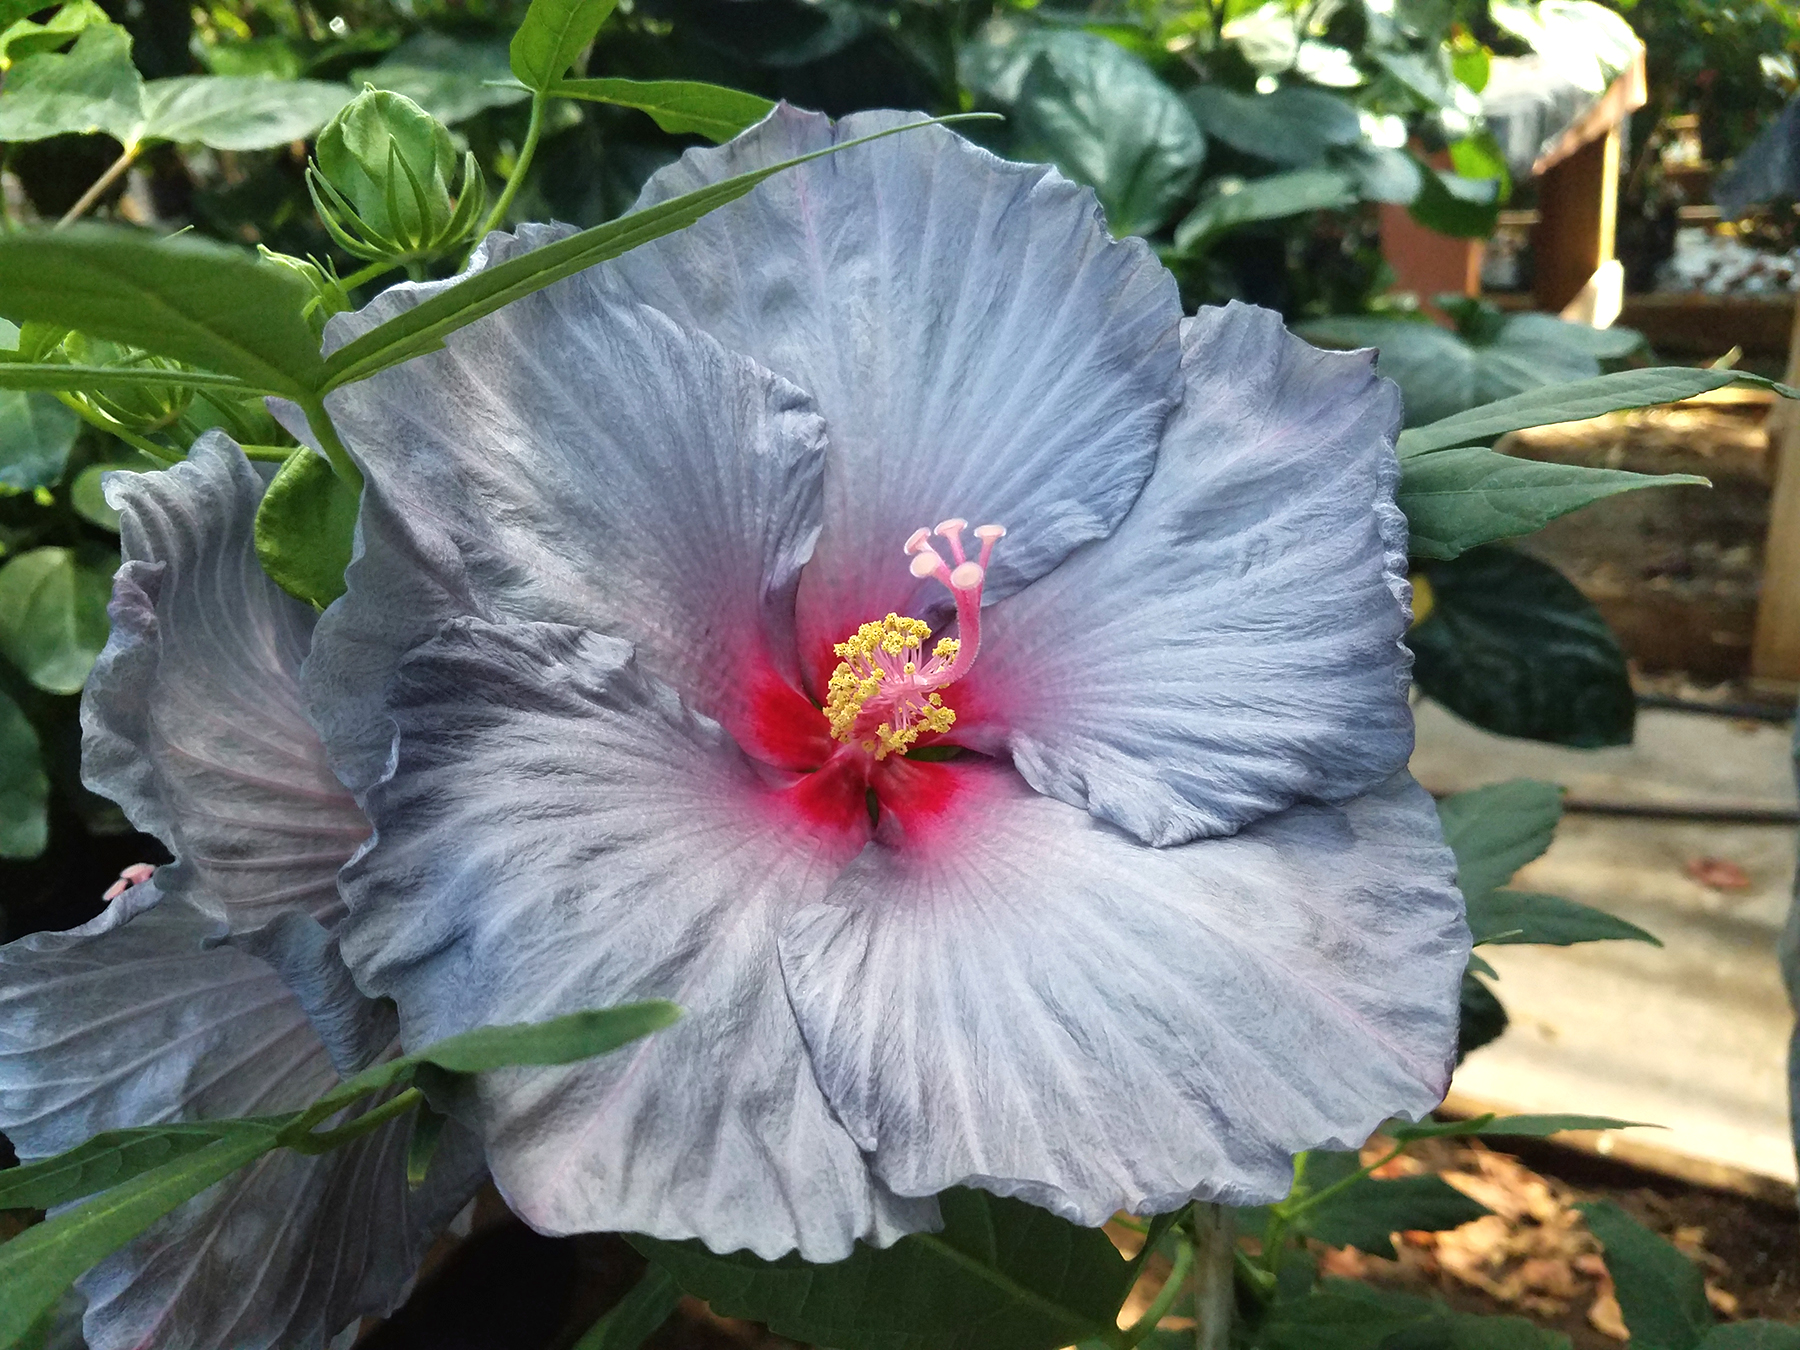 Texas grocer to offer limited run of AgriLife Research-bred hibiscus